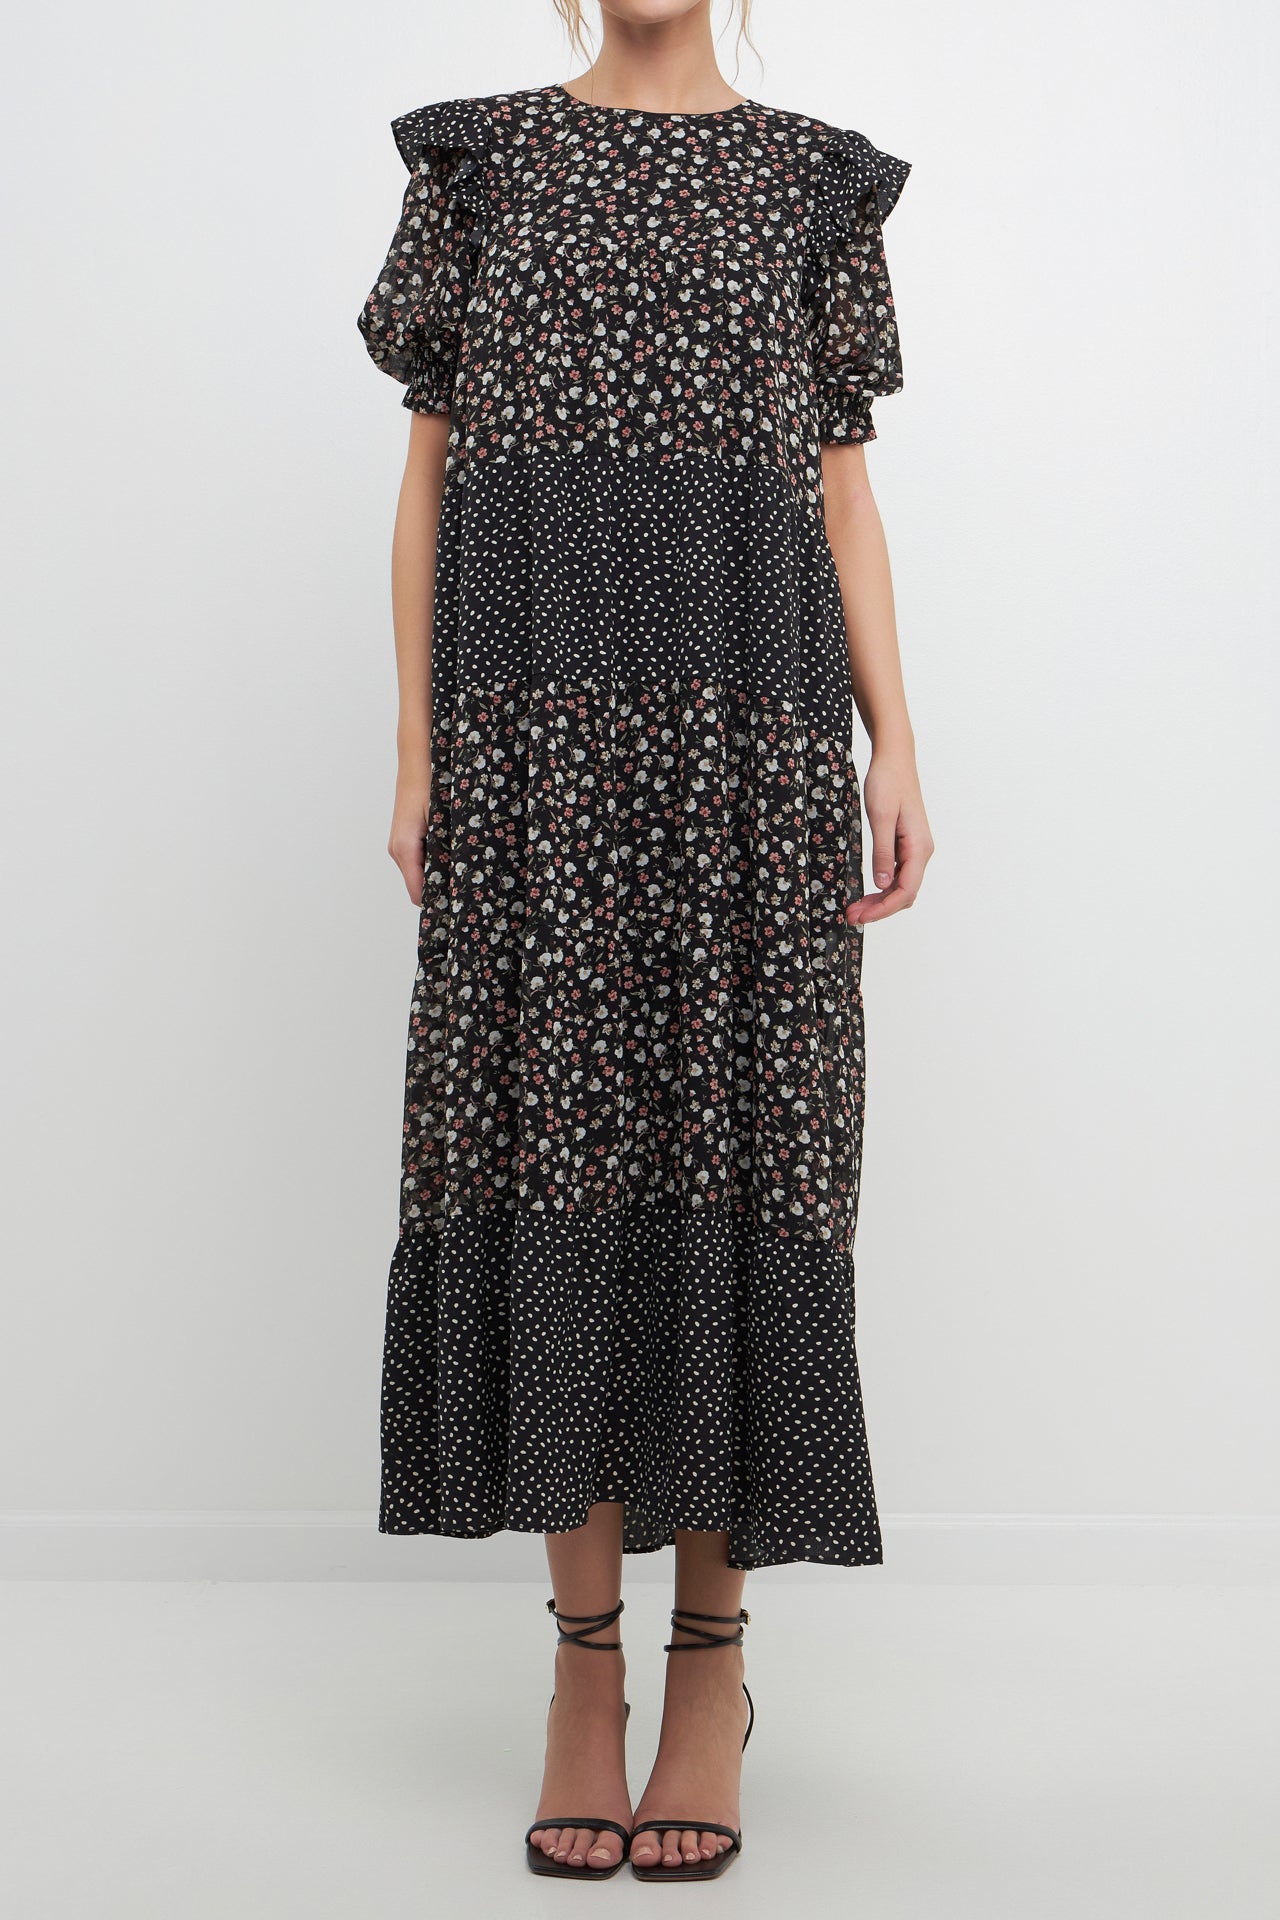 FREE THE ROSES - Floral & Dot Print Maxi Dress - DRESSES available at Objectrare